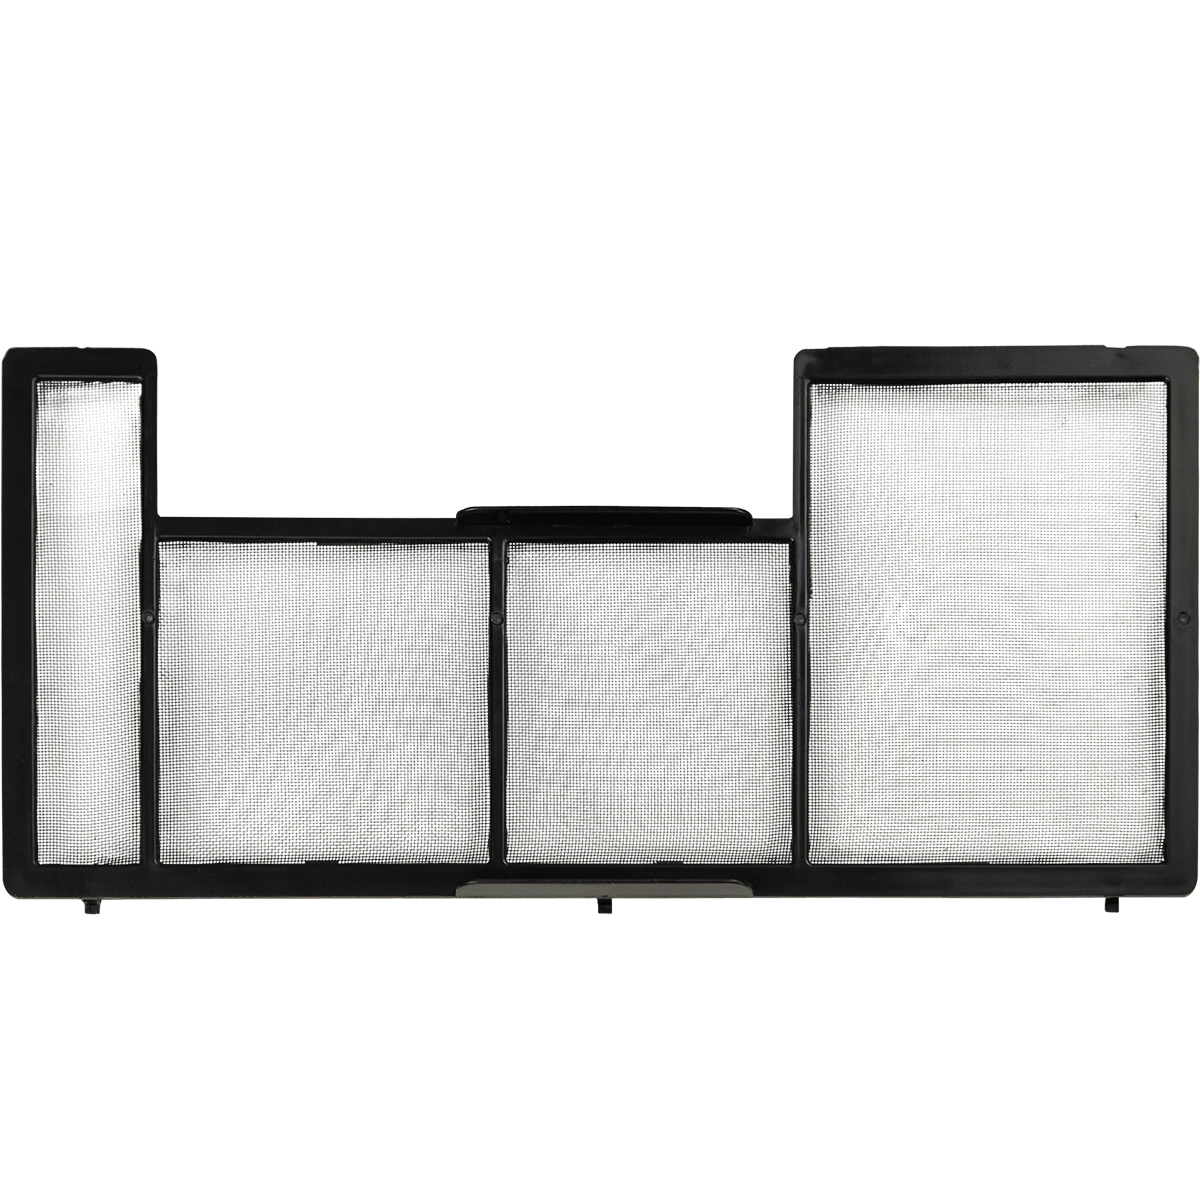 Honeywell Condenser Filter for MM14 Portable AC - Black (A7331-200-A-22)